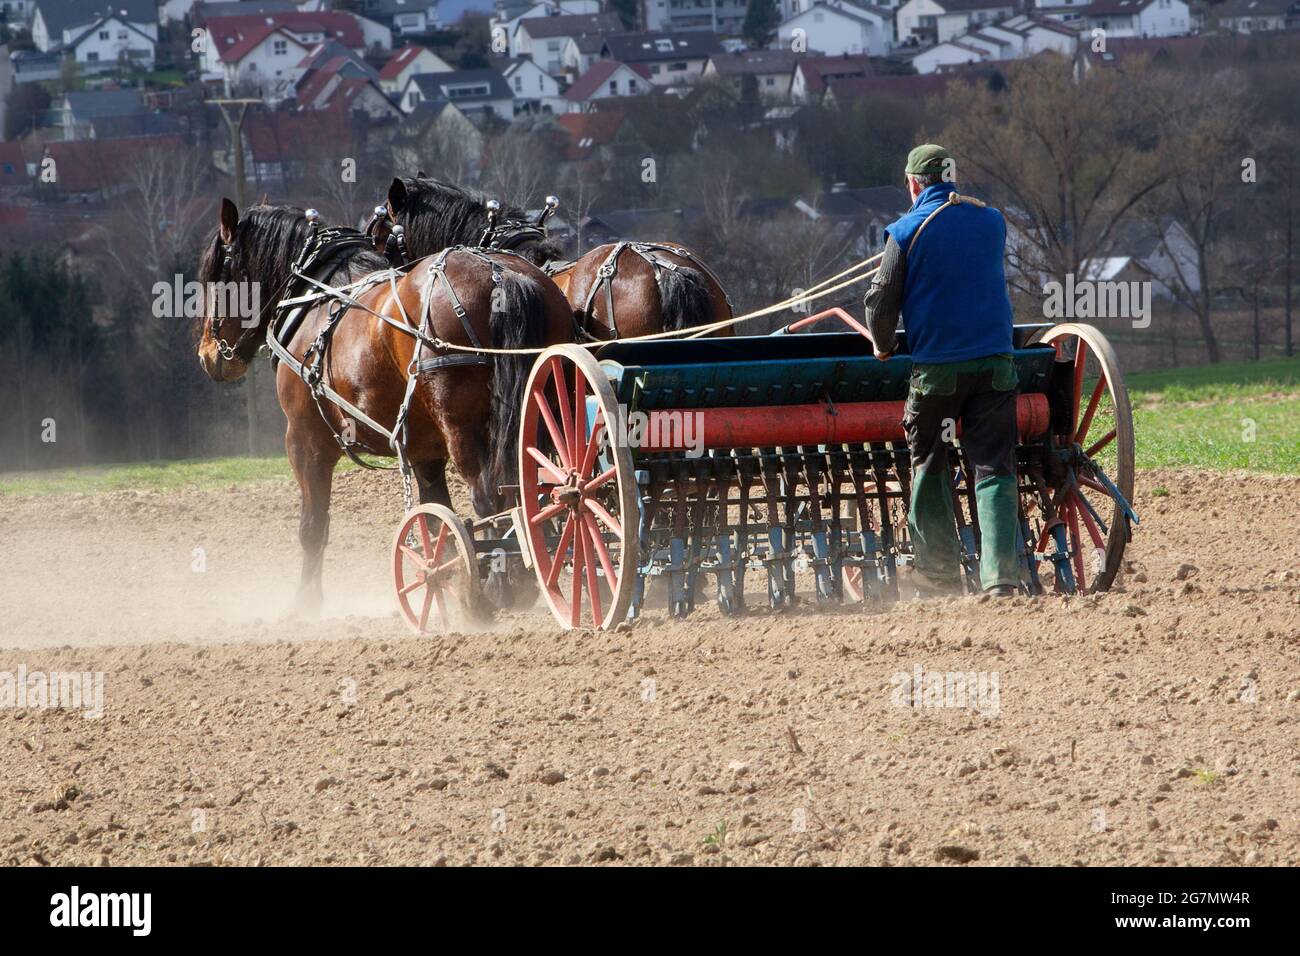 Horses working in agriculture Stock Photo